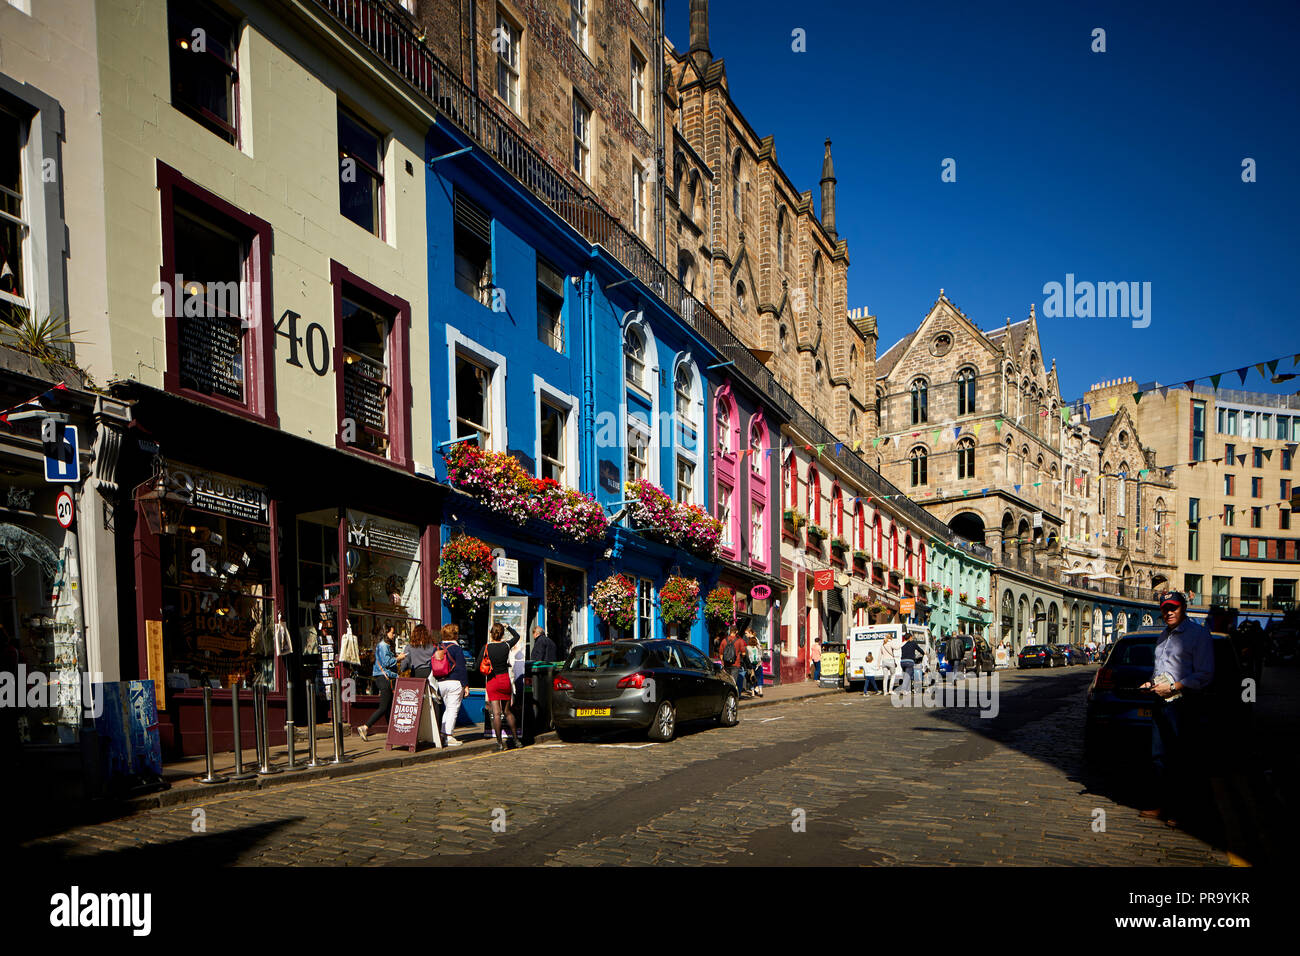 Historic Edinburgh, Scotland Grassmarket   cobbled West Bow leading up to Victoria Street lined with posh independent shops with Victoria Terrace abov Stock Photo